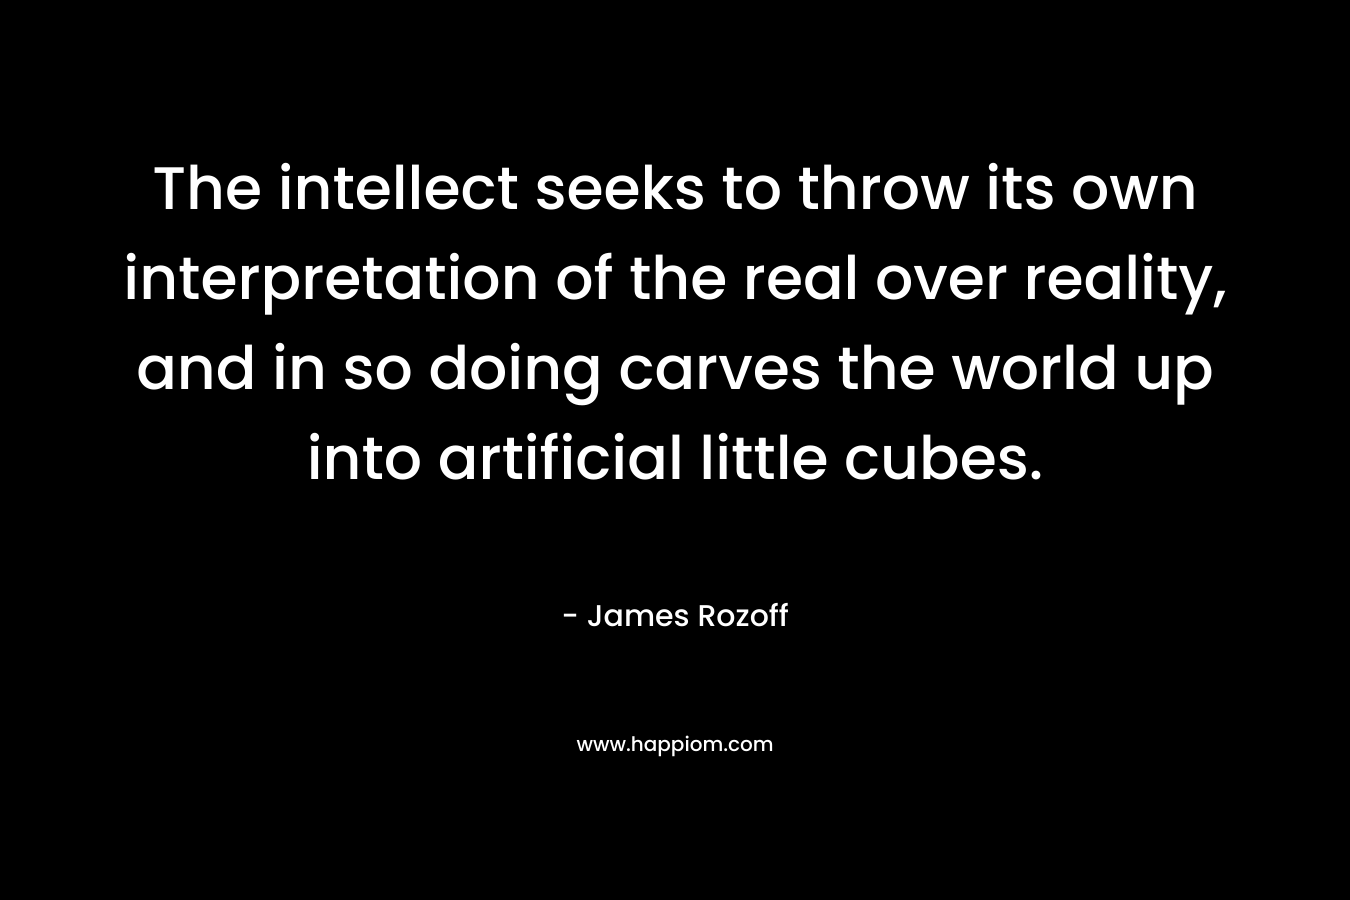 The intellect seeks to throw its own interpretation of the real over reality, and in so doing carves the world up into artificial little cubes.